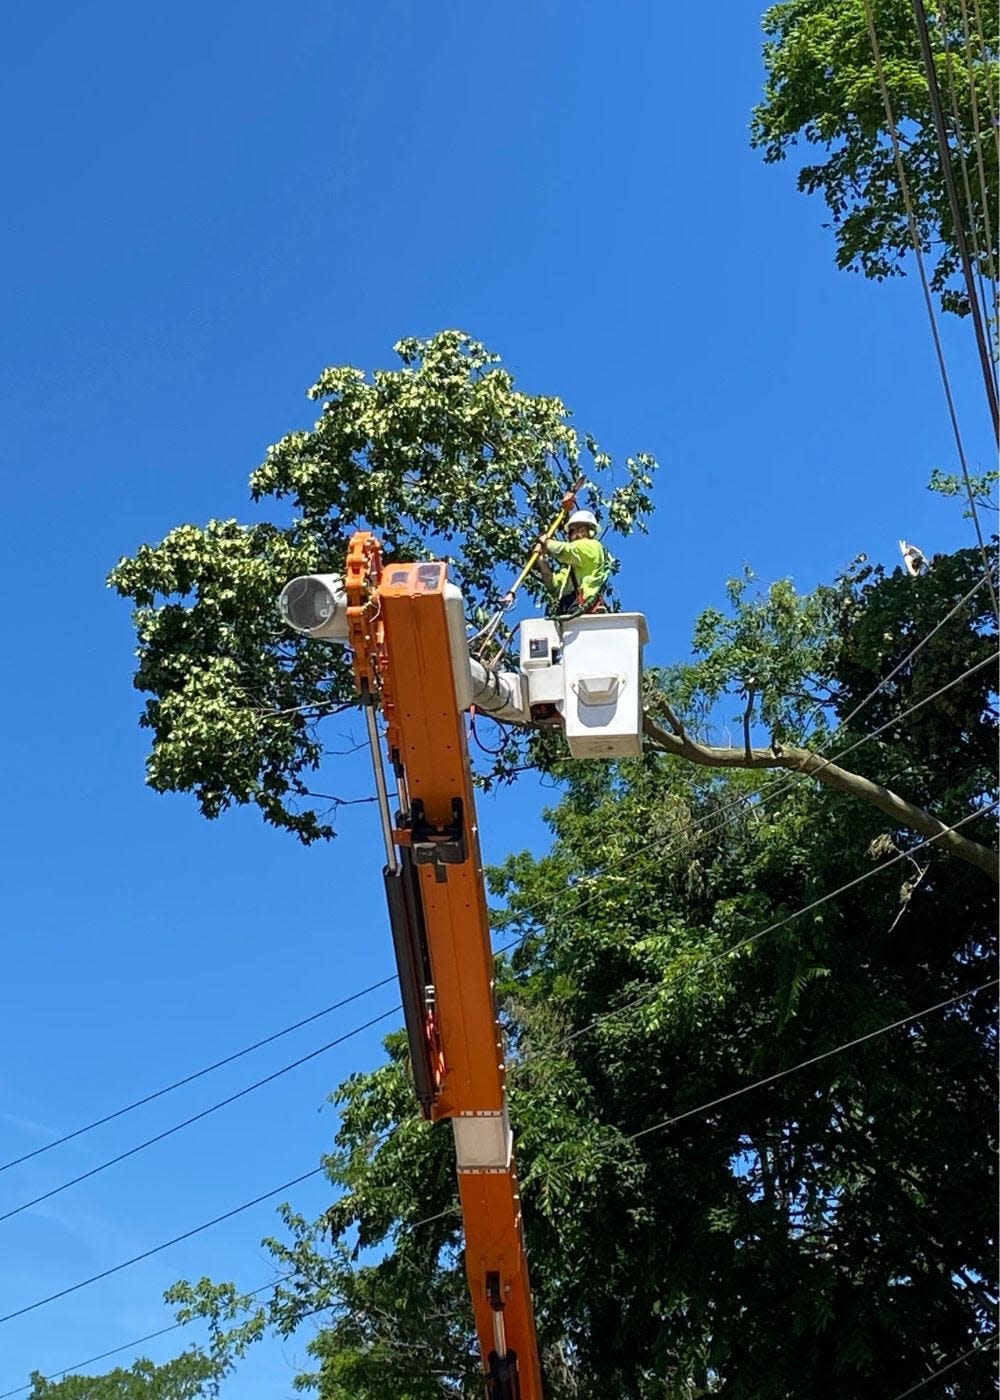 An AEP worker efforts to to clear a tree from power lines following the June 14 storm that caused widespread electric outages.